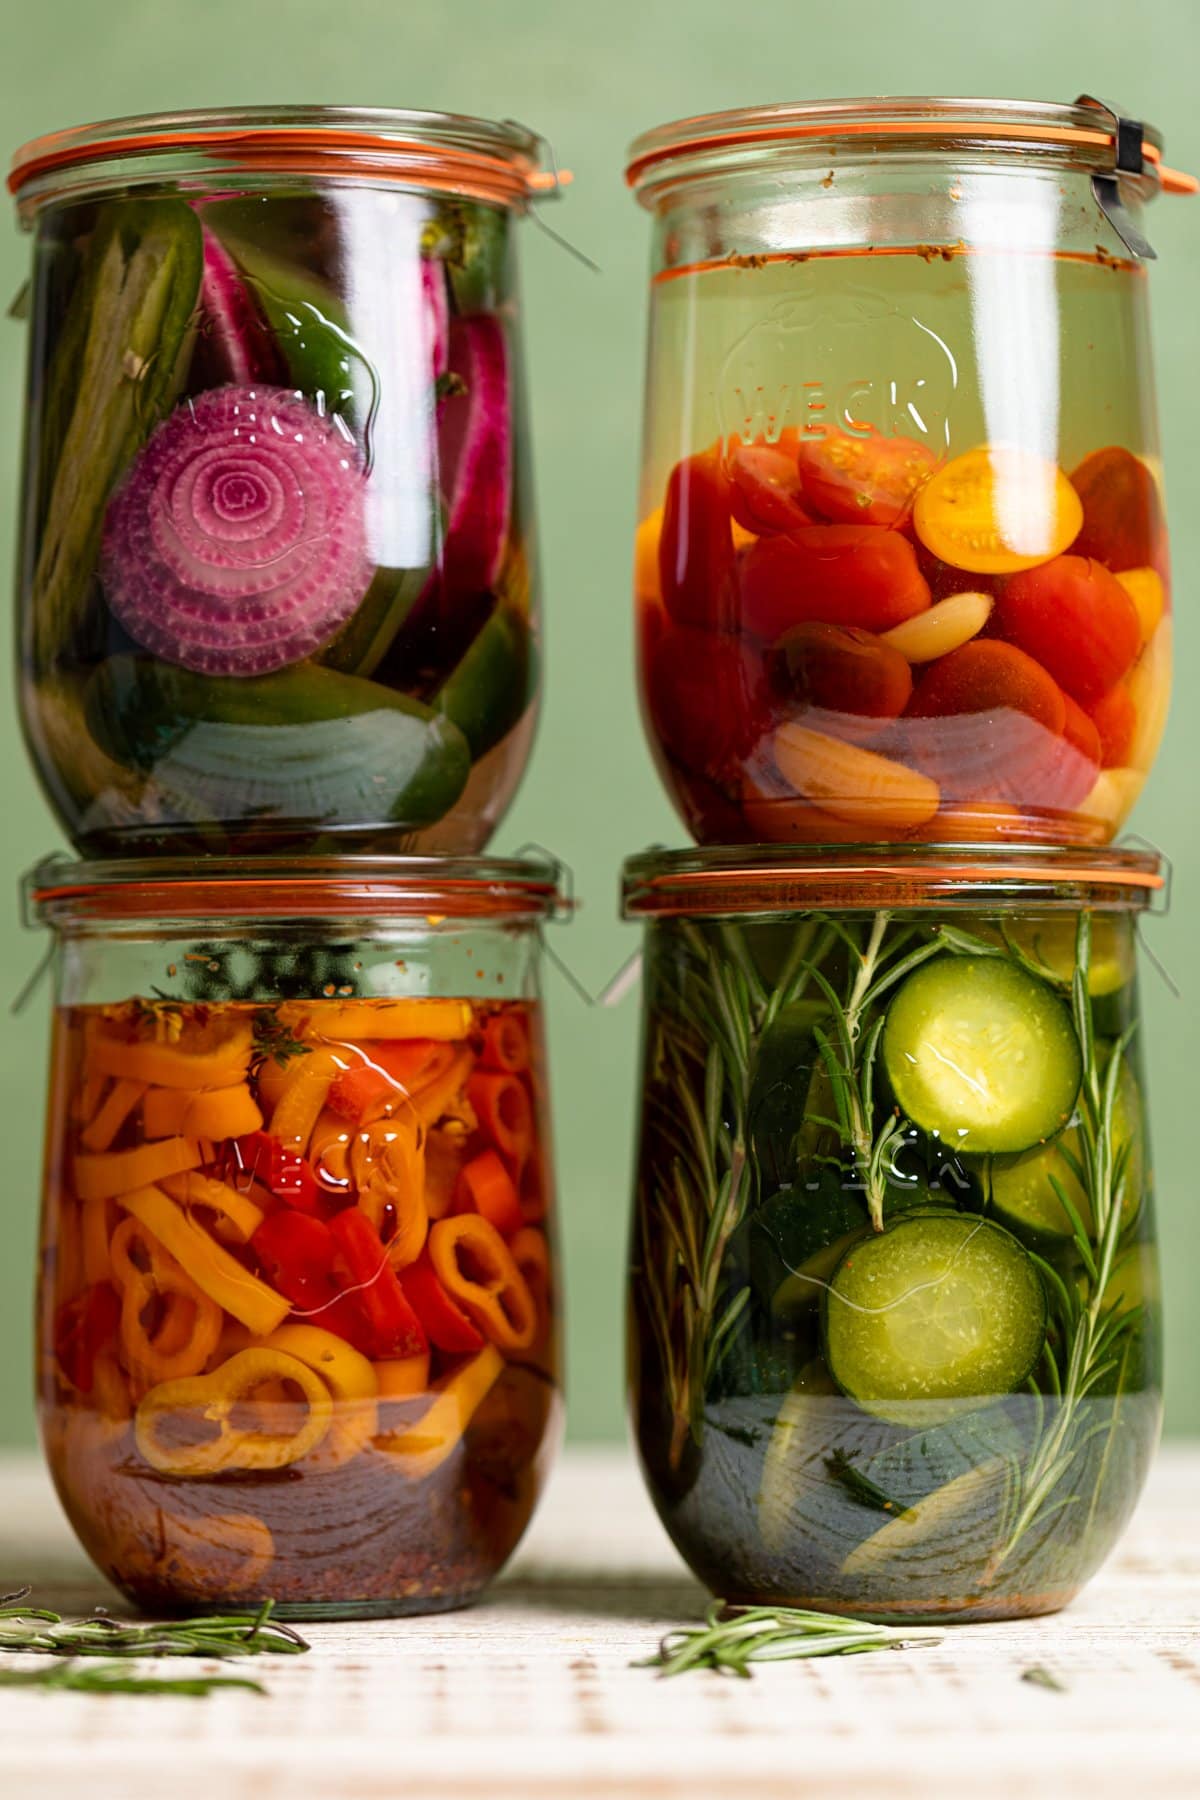 Four jars of quick pickled vegetables in two stacks of two